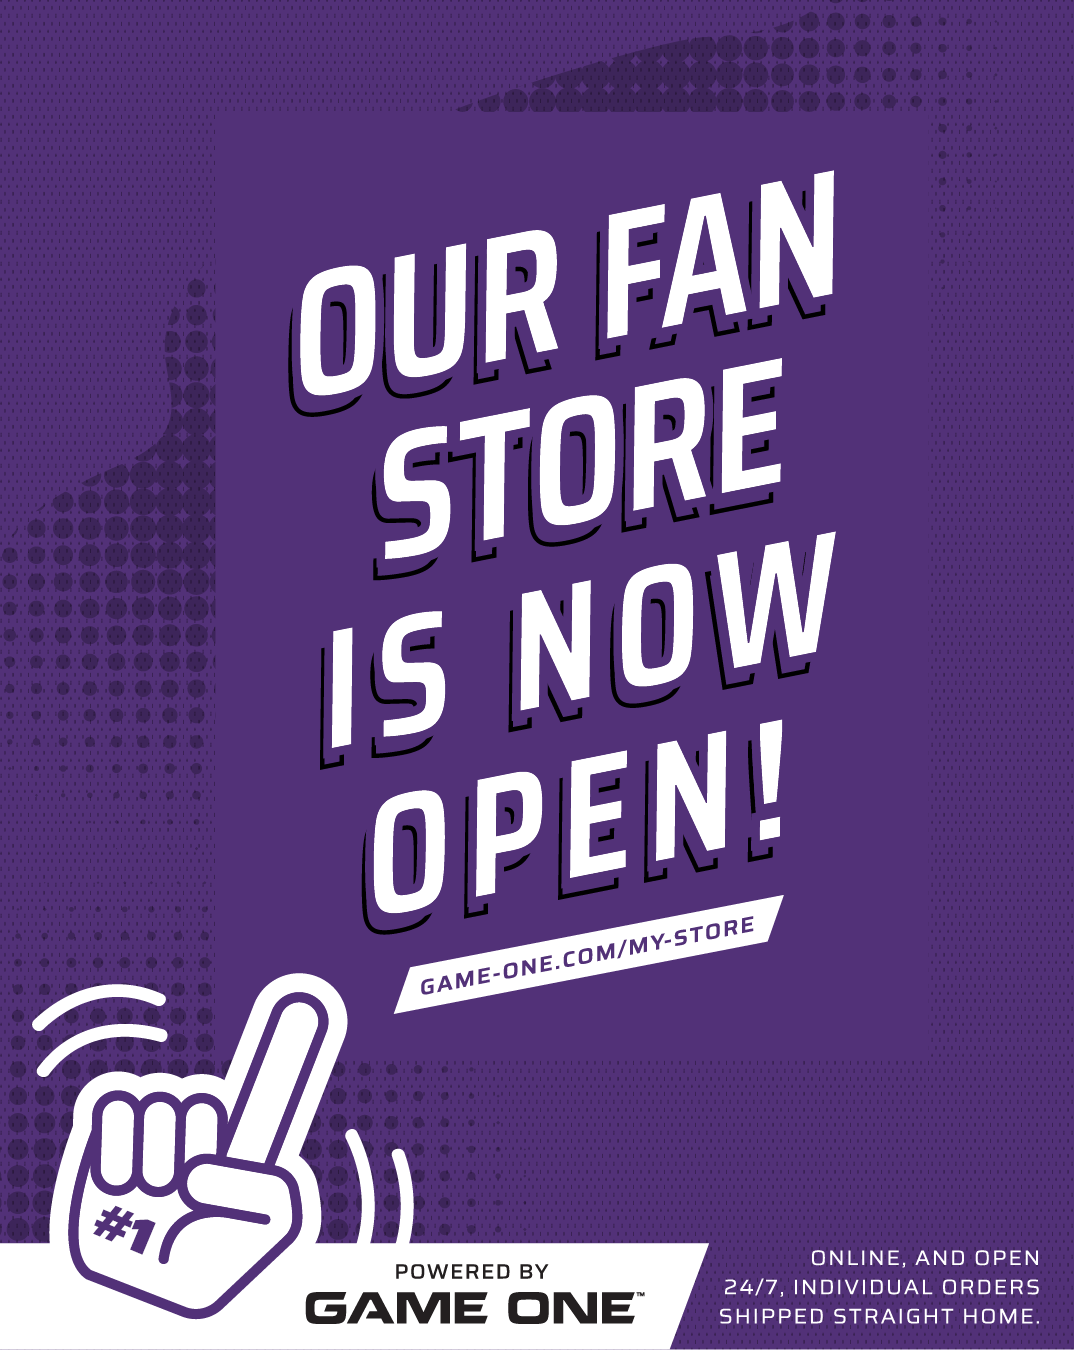 Our Online Fan Store Is Now Open - Powered By Game One